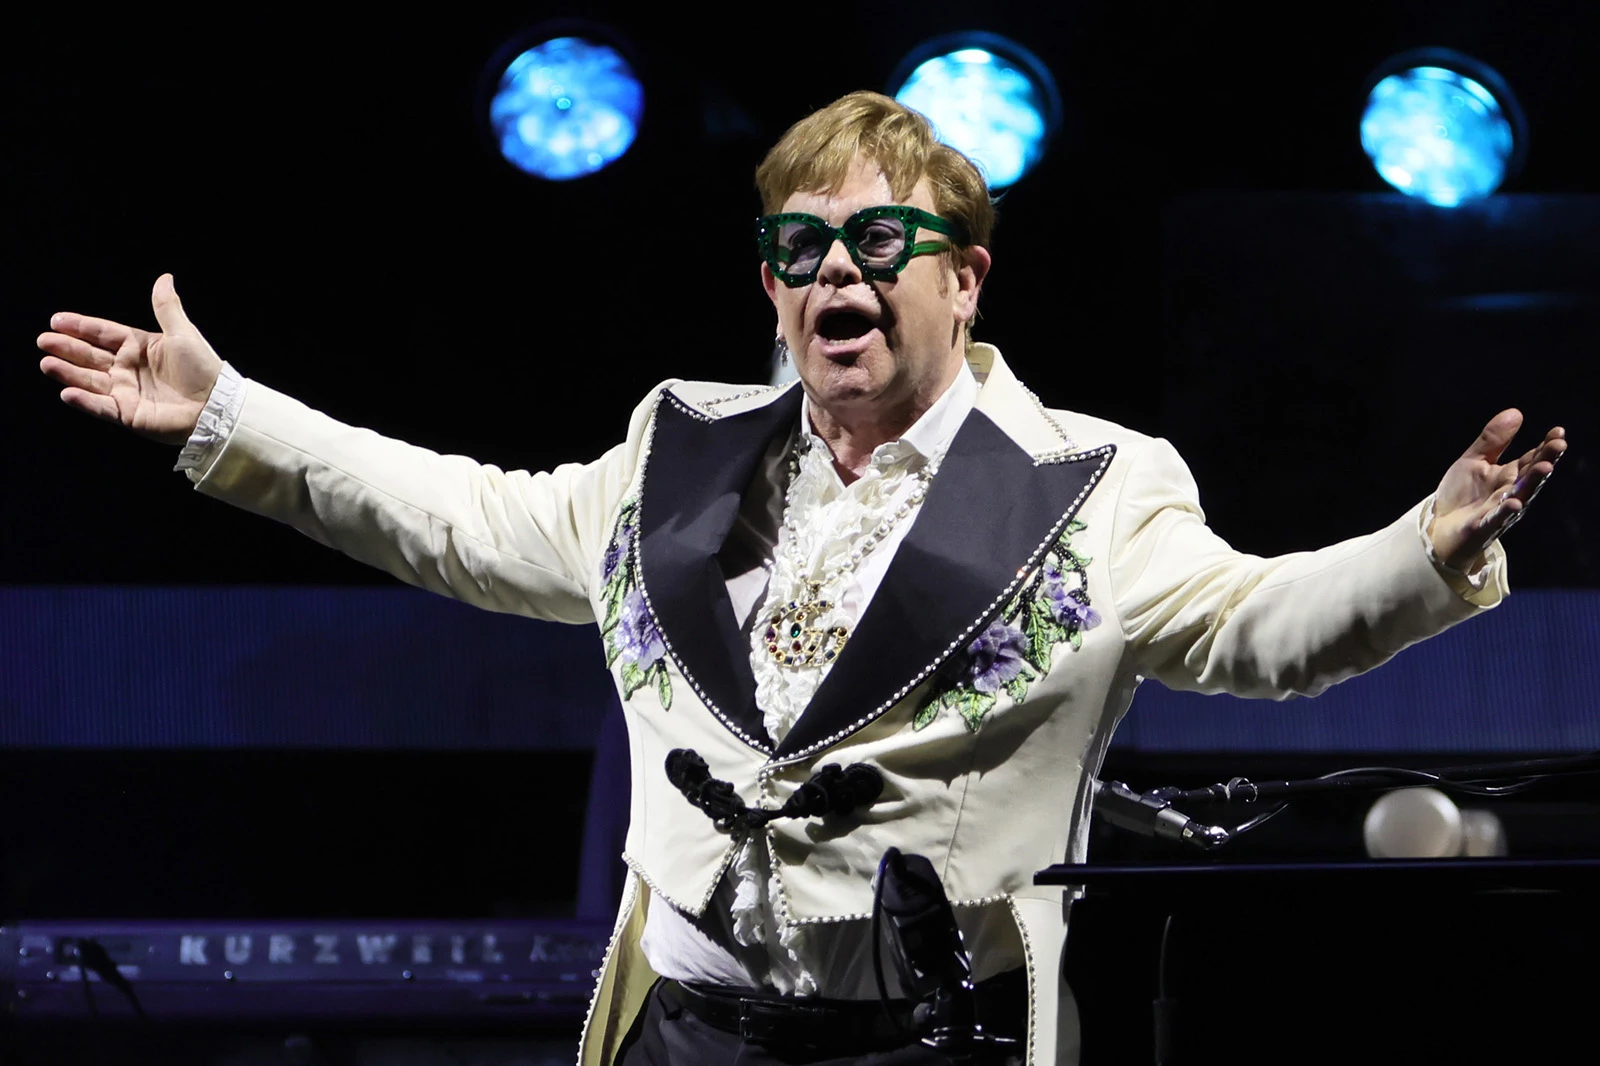 Elton John Now Has the Highest-Grossing Tour of All Time